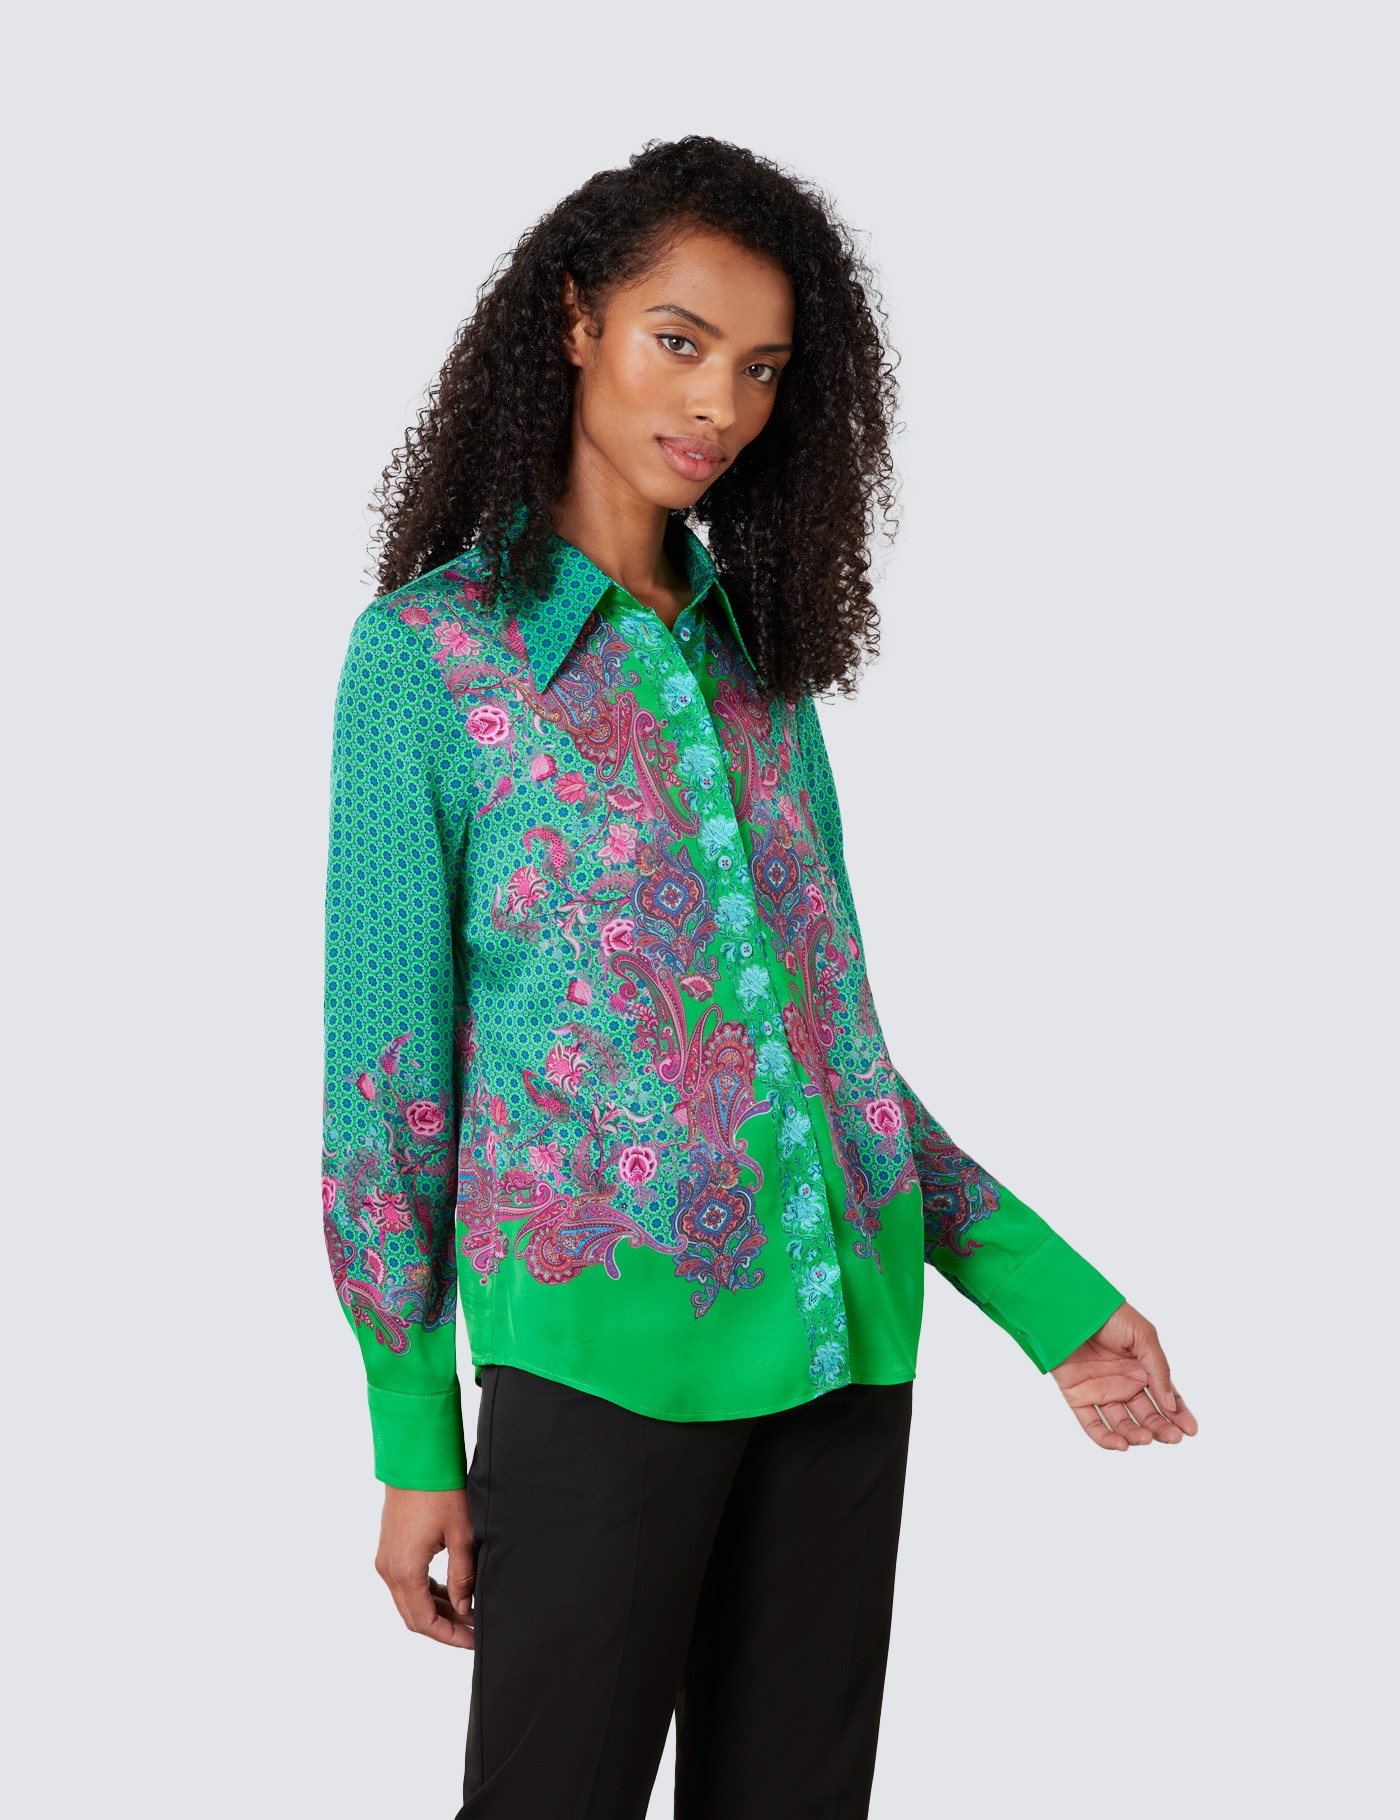 Satin Women's Semi Fitted Boutique Shirt with Geometric Paisley Print ...